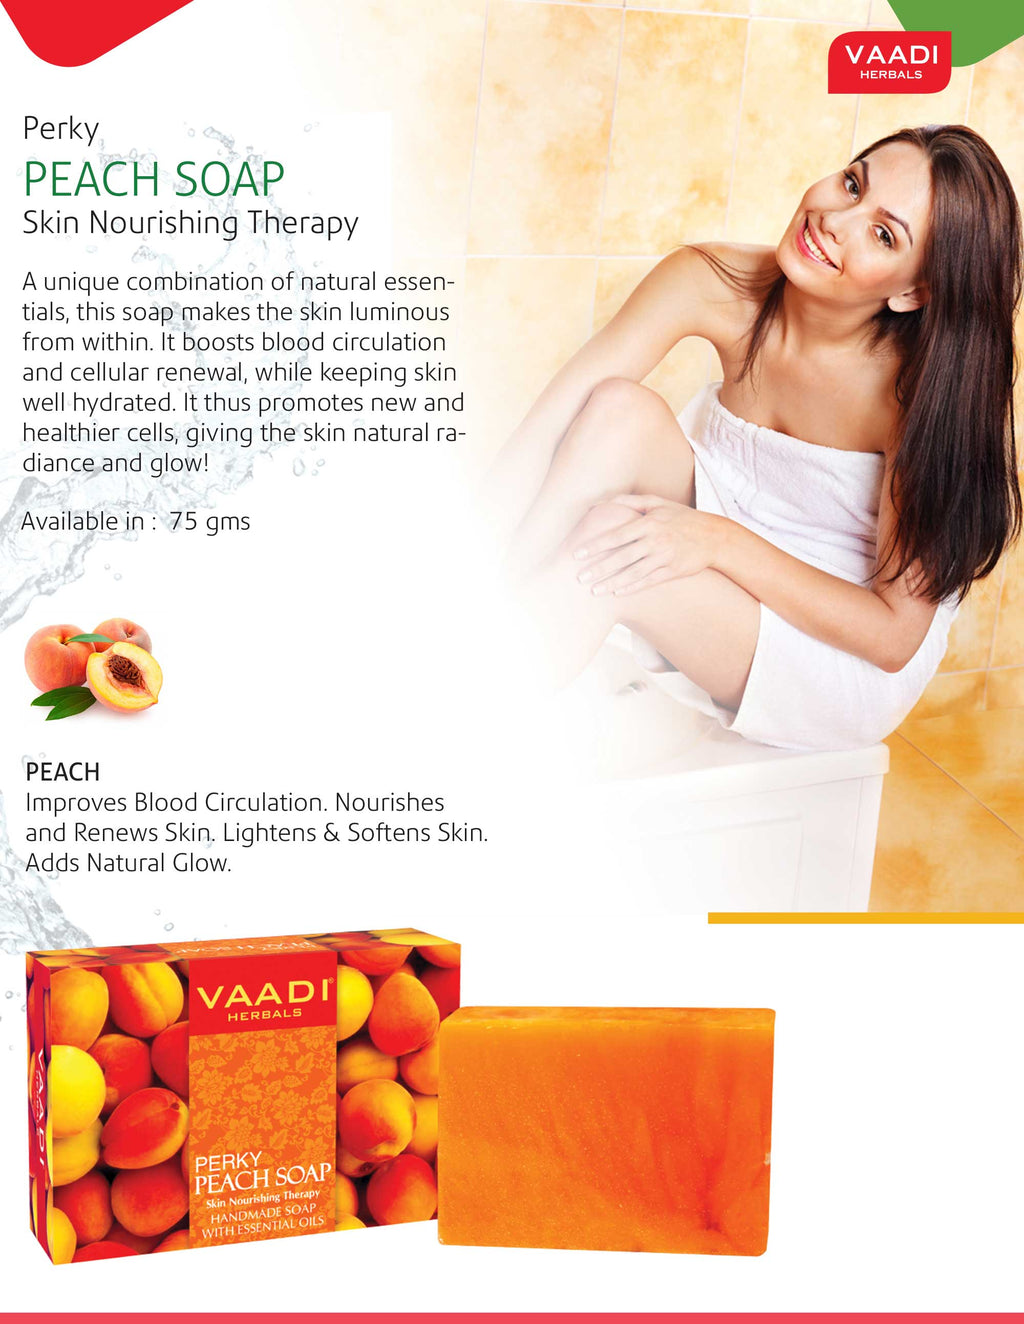 Organic Perky Peach Soap with Almond Oil 